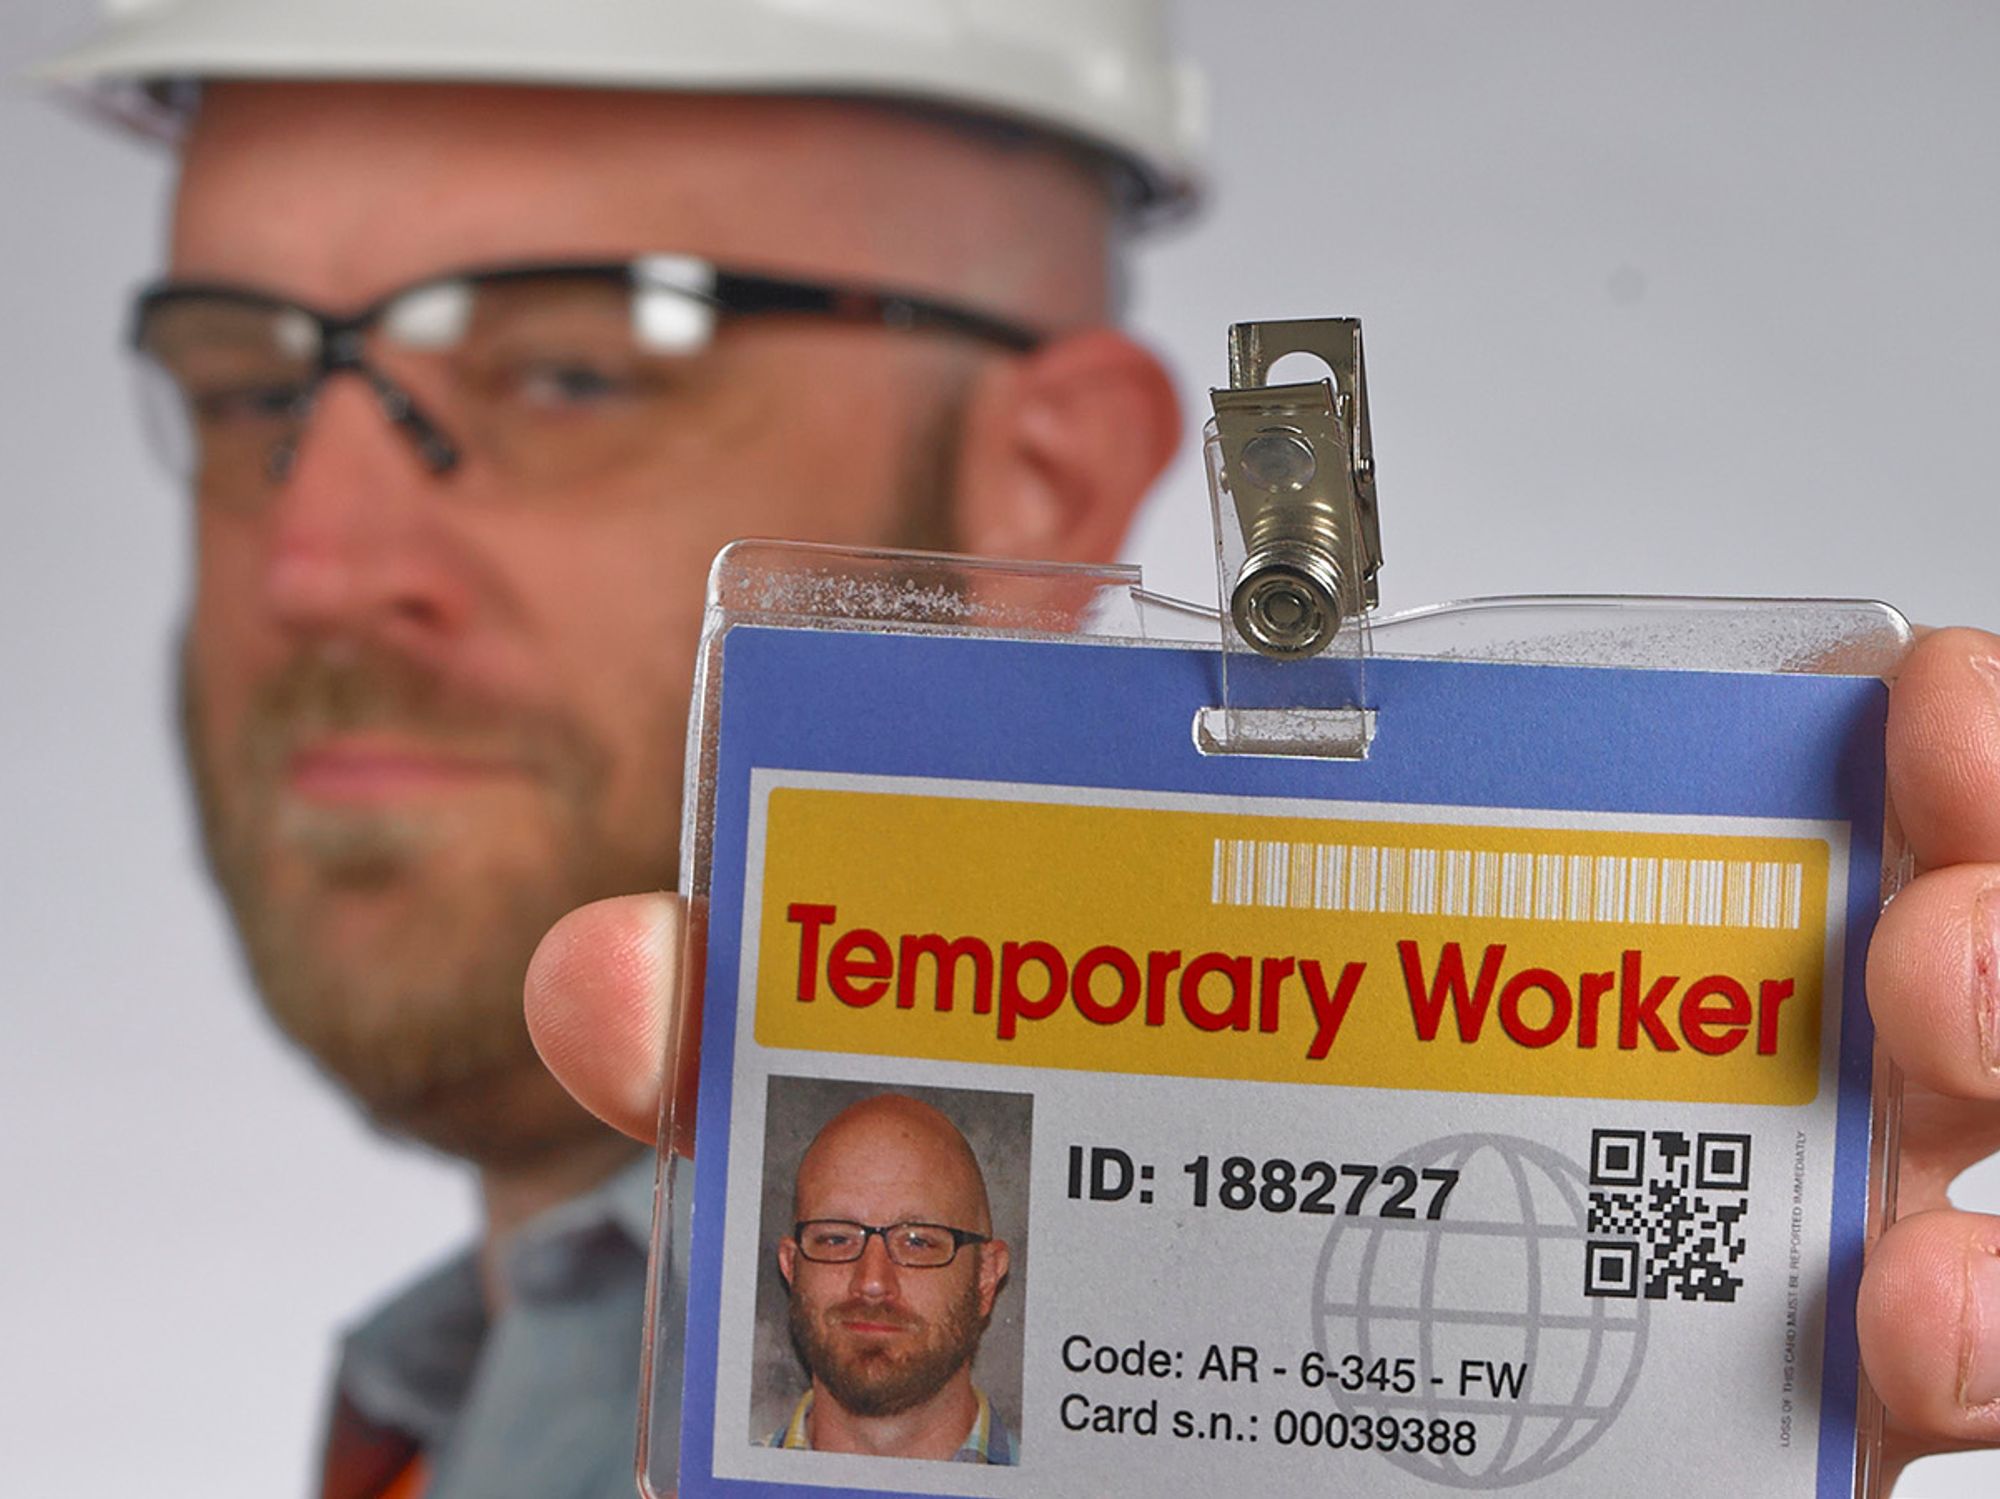 Who trains contract and temporary employees?